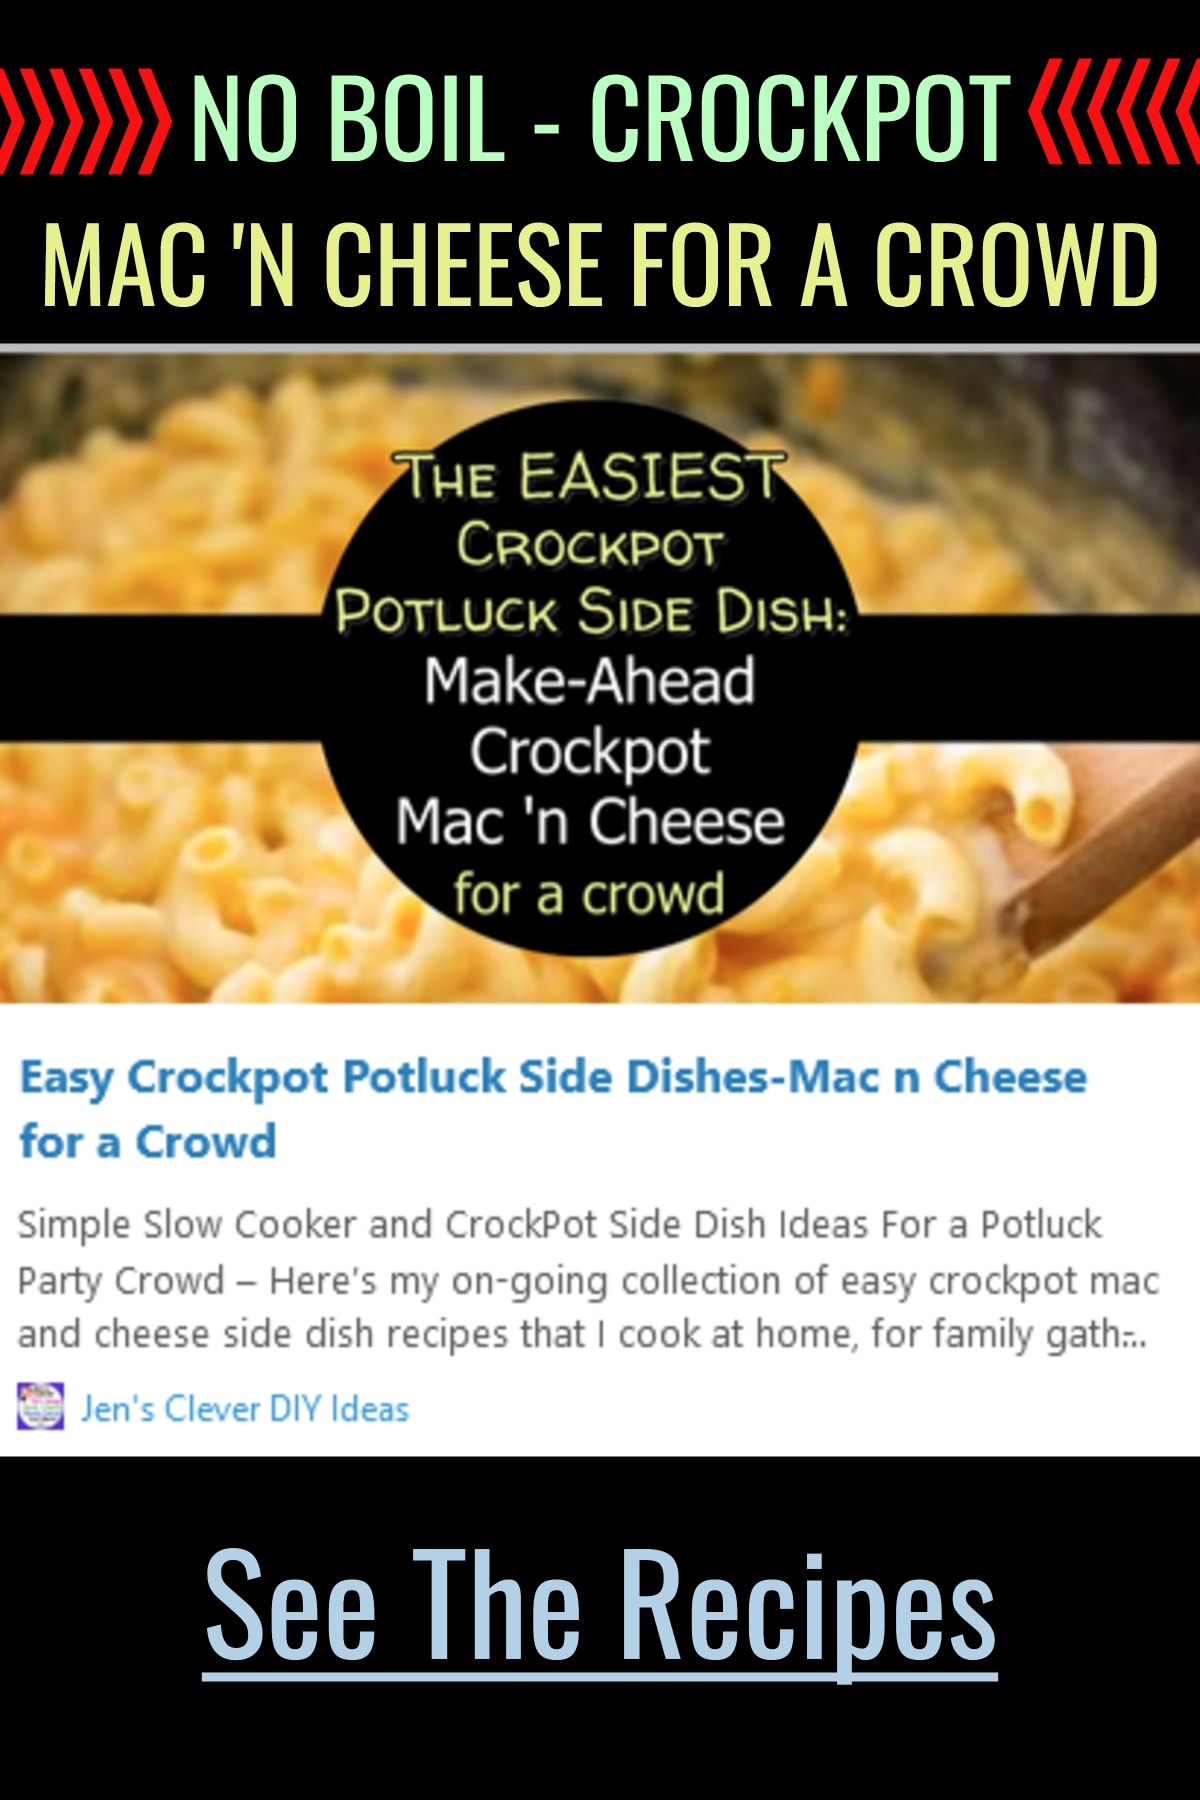 potluck side dishes ideas - crockpot macaroni and cheese